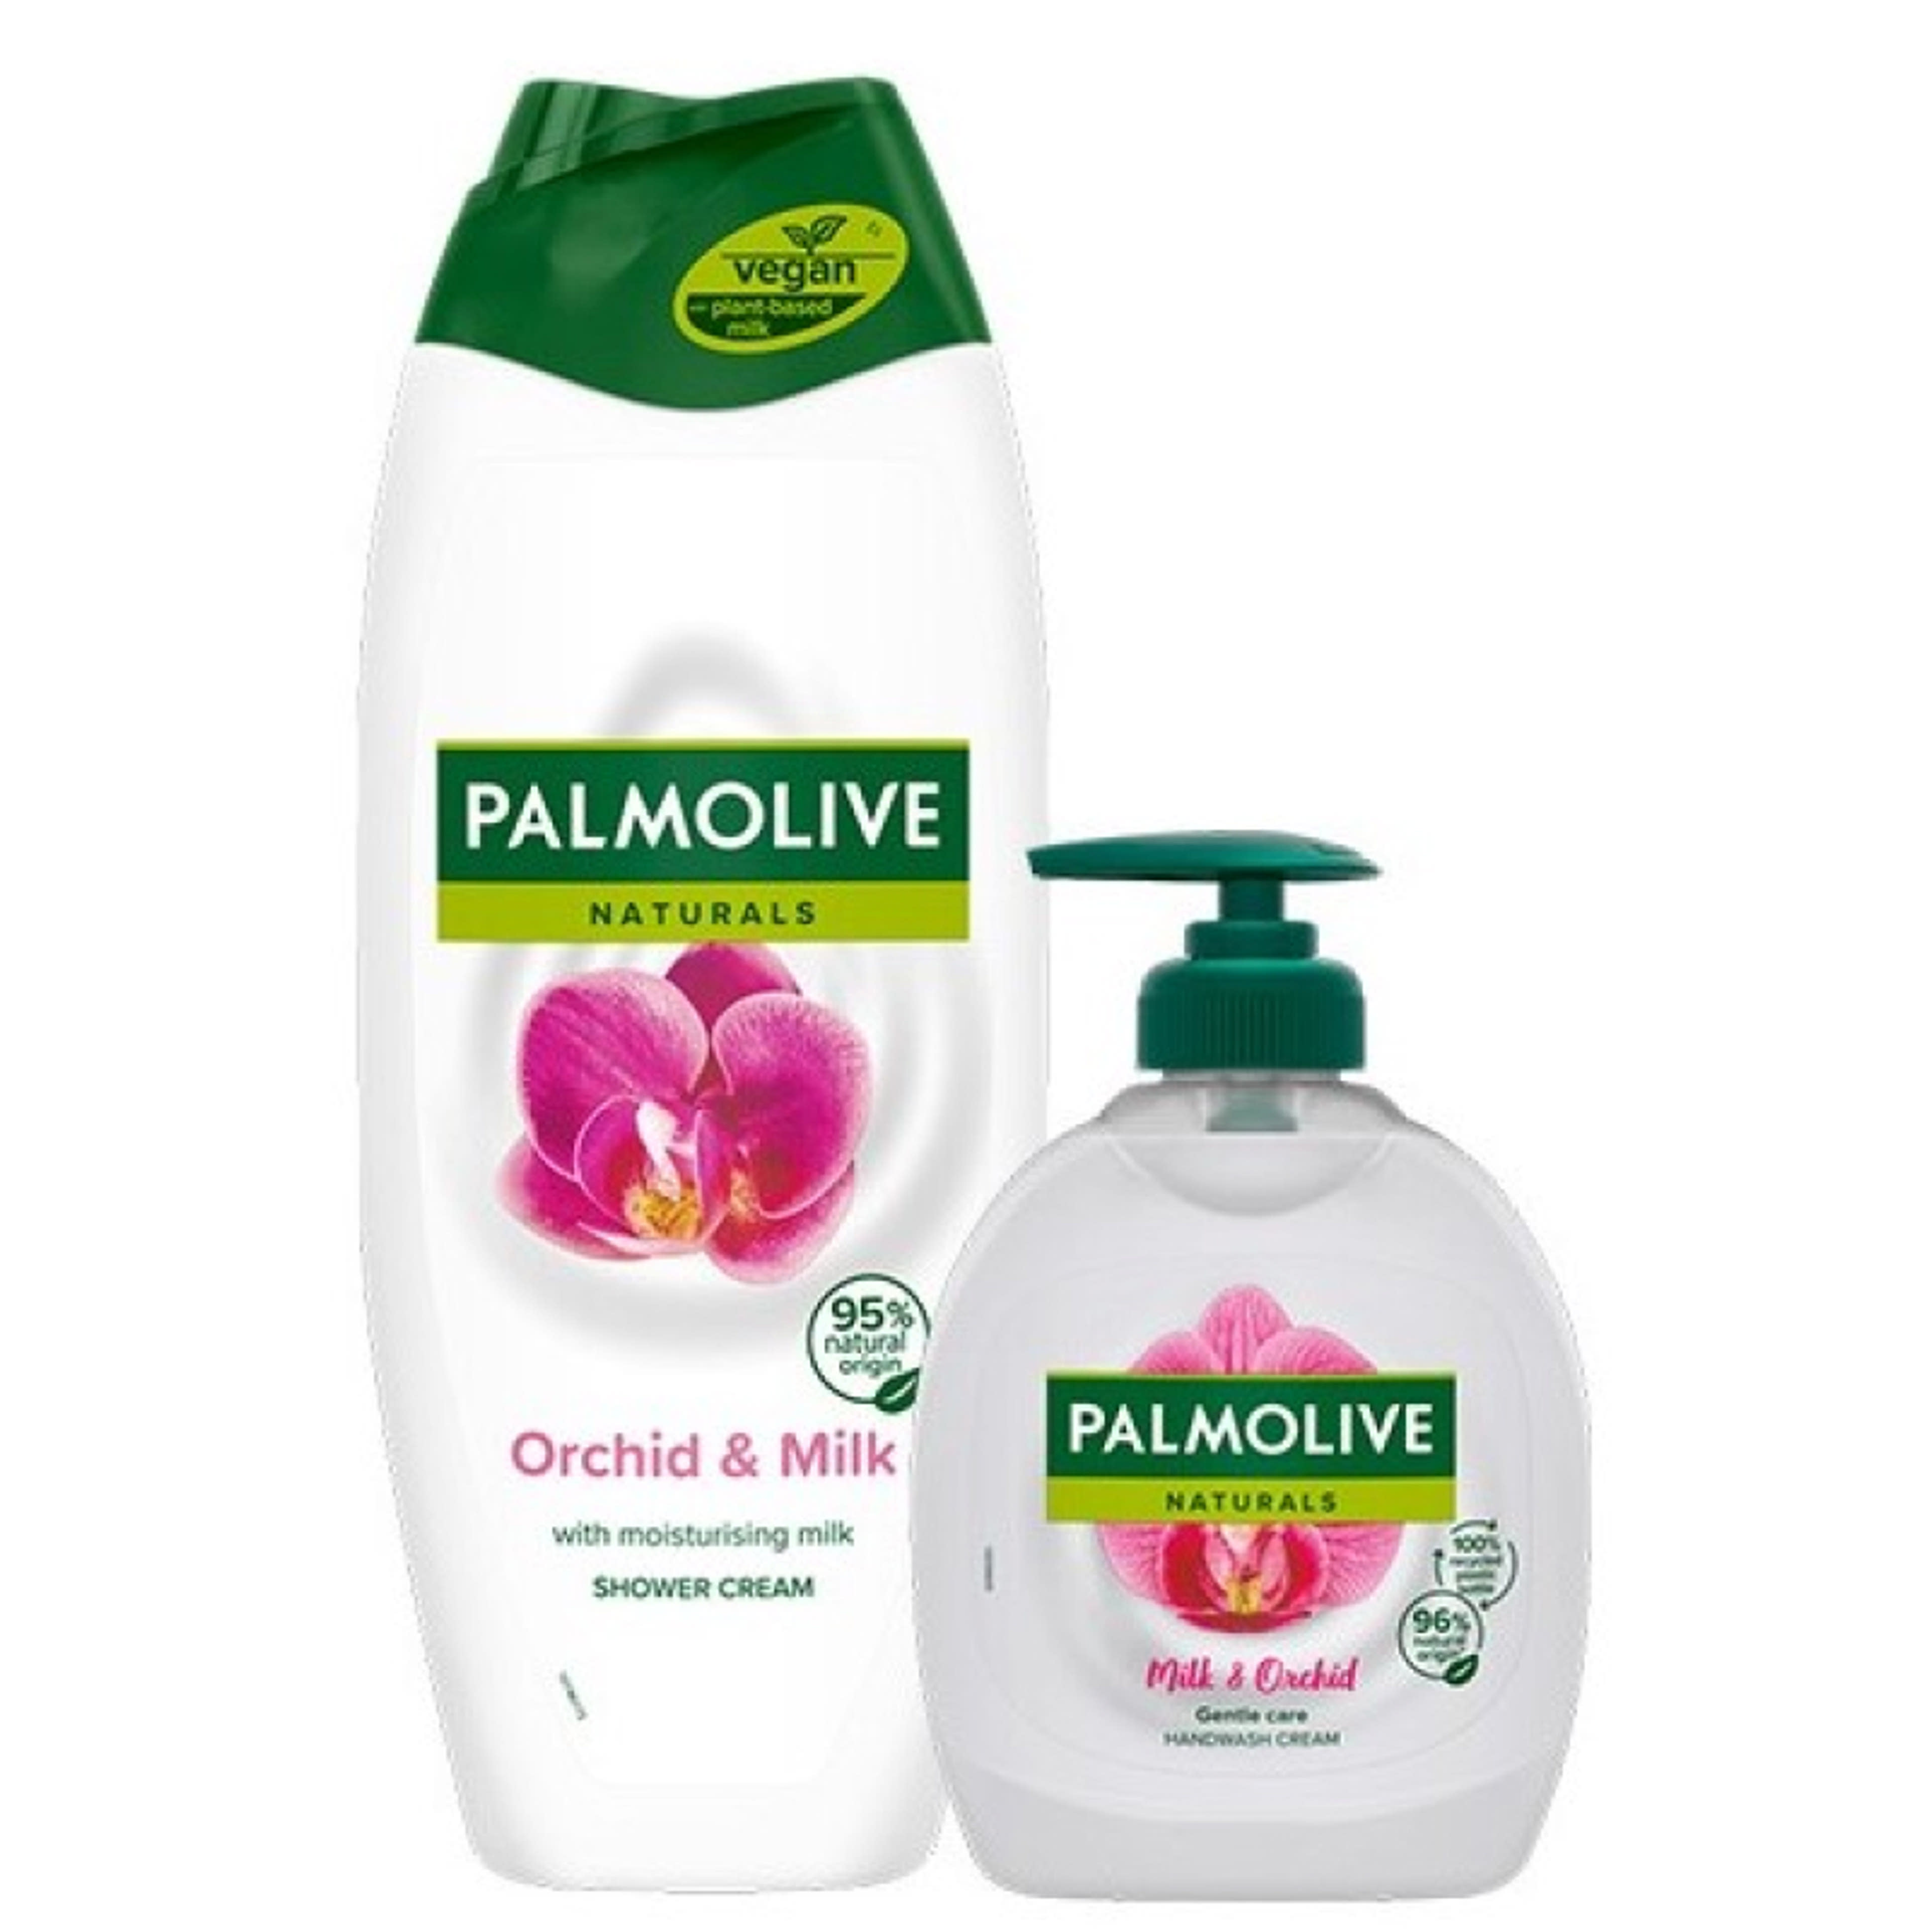 Palmolive Orchid csomag-1